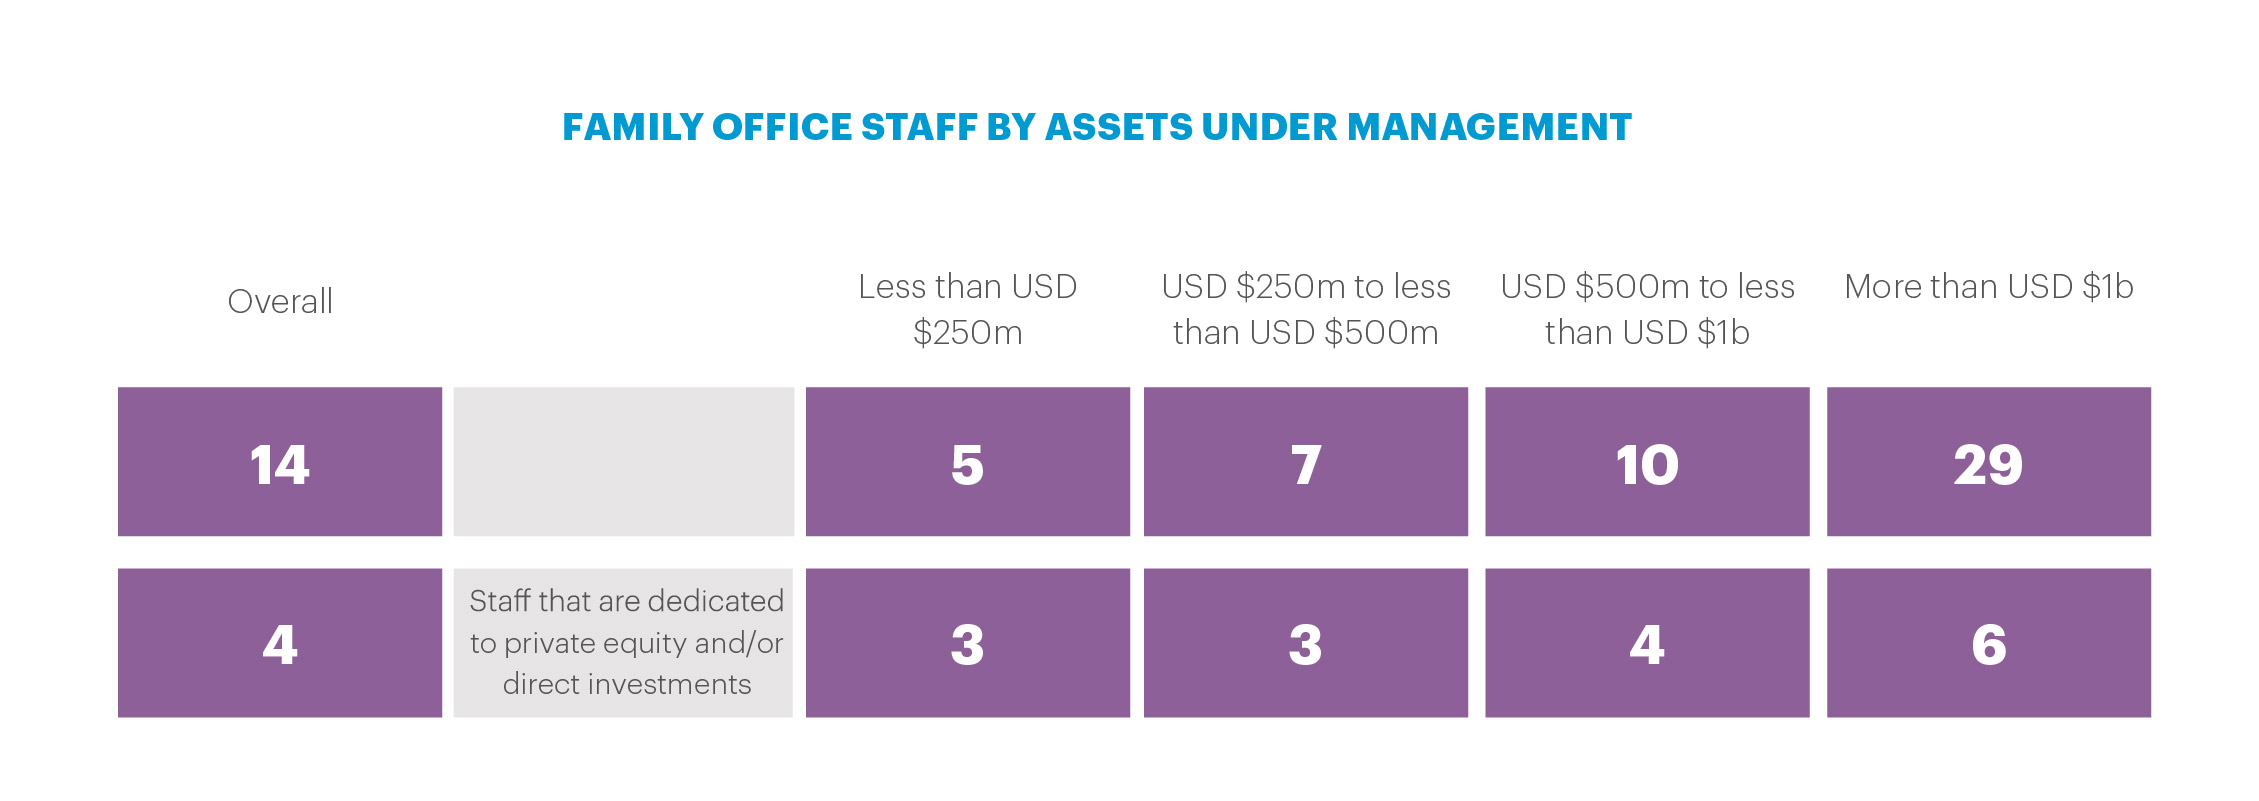 FO staff by assets under management